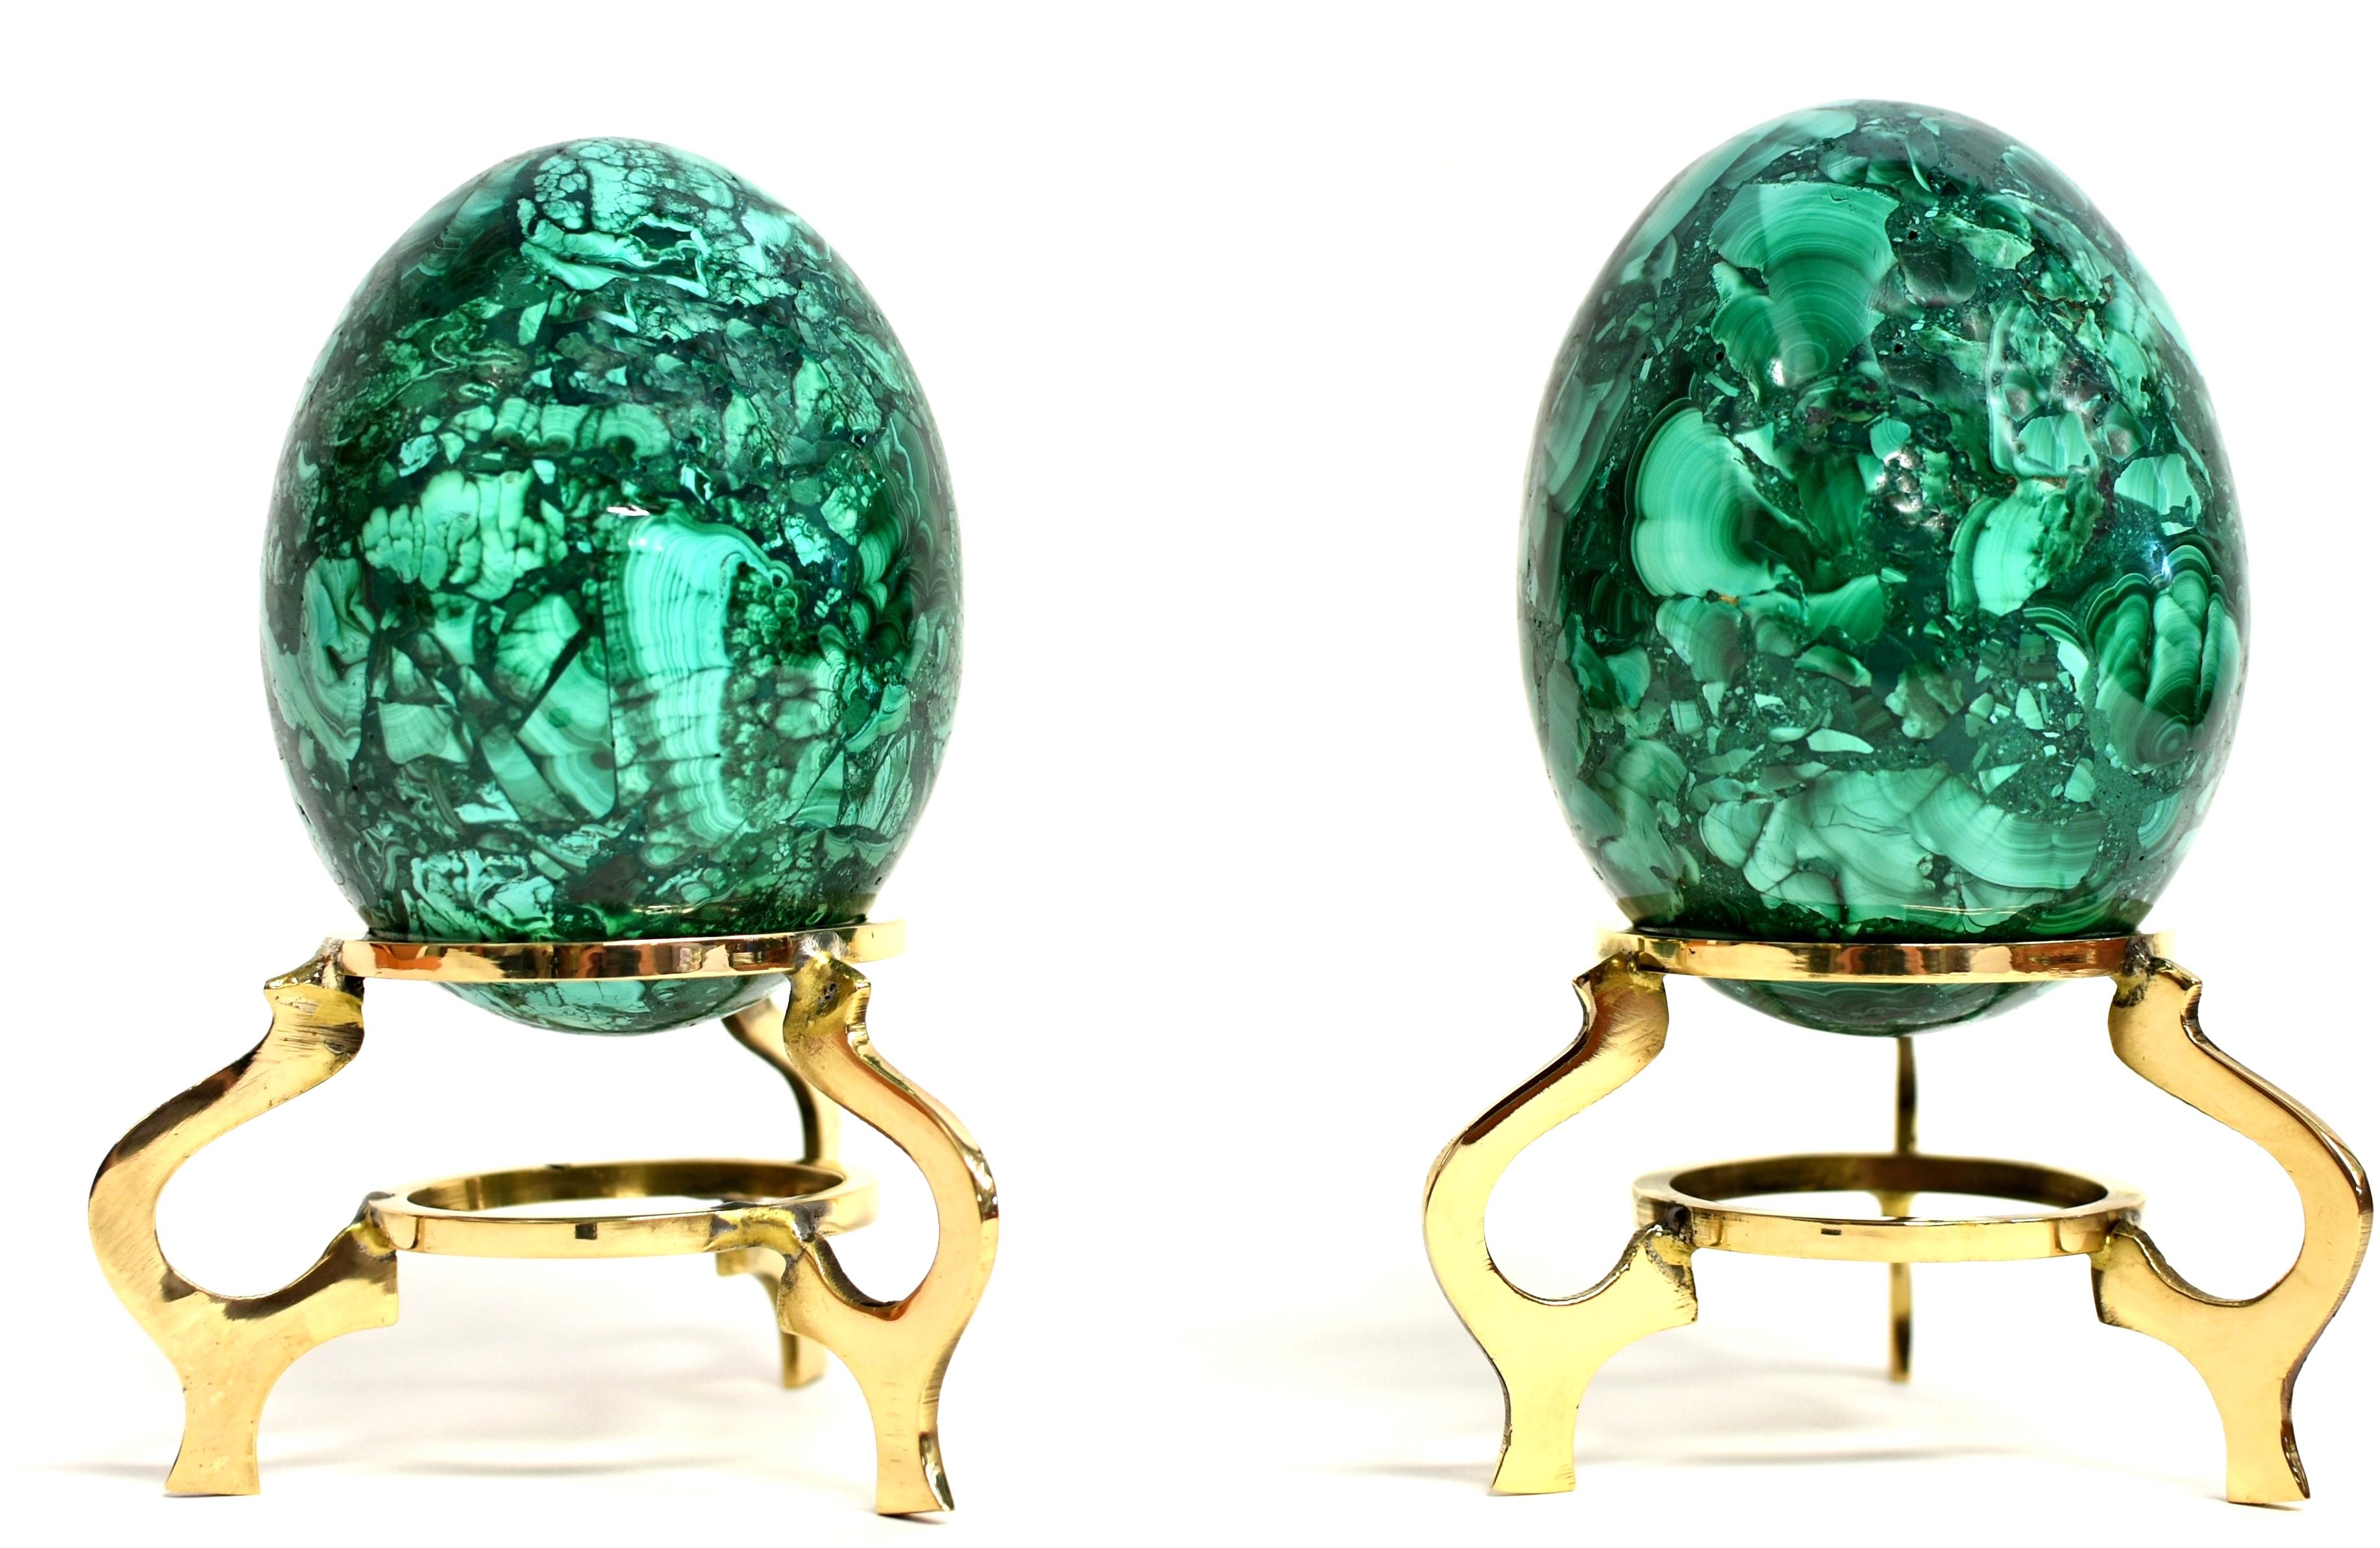 Set of two splendid malachite eggs. Hand crafted and polished, displaying fantastic various natural patterns of swirls and stripes. A stone of transformation, malachite provides balance and protection. A remarkable objet d'art of luxury and